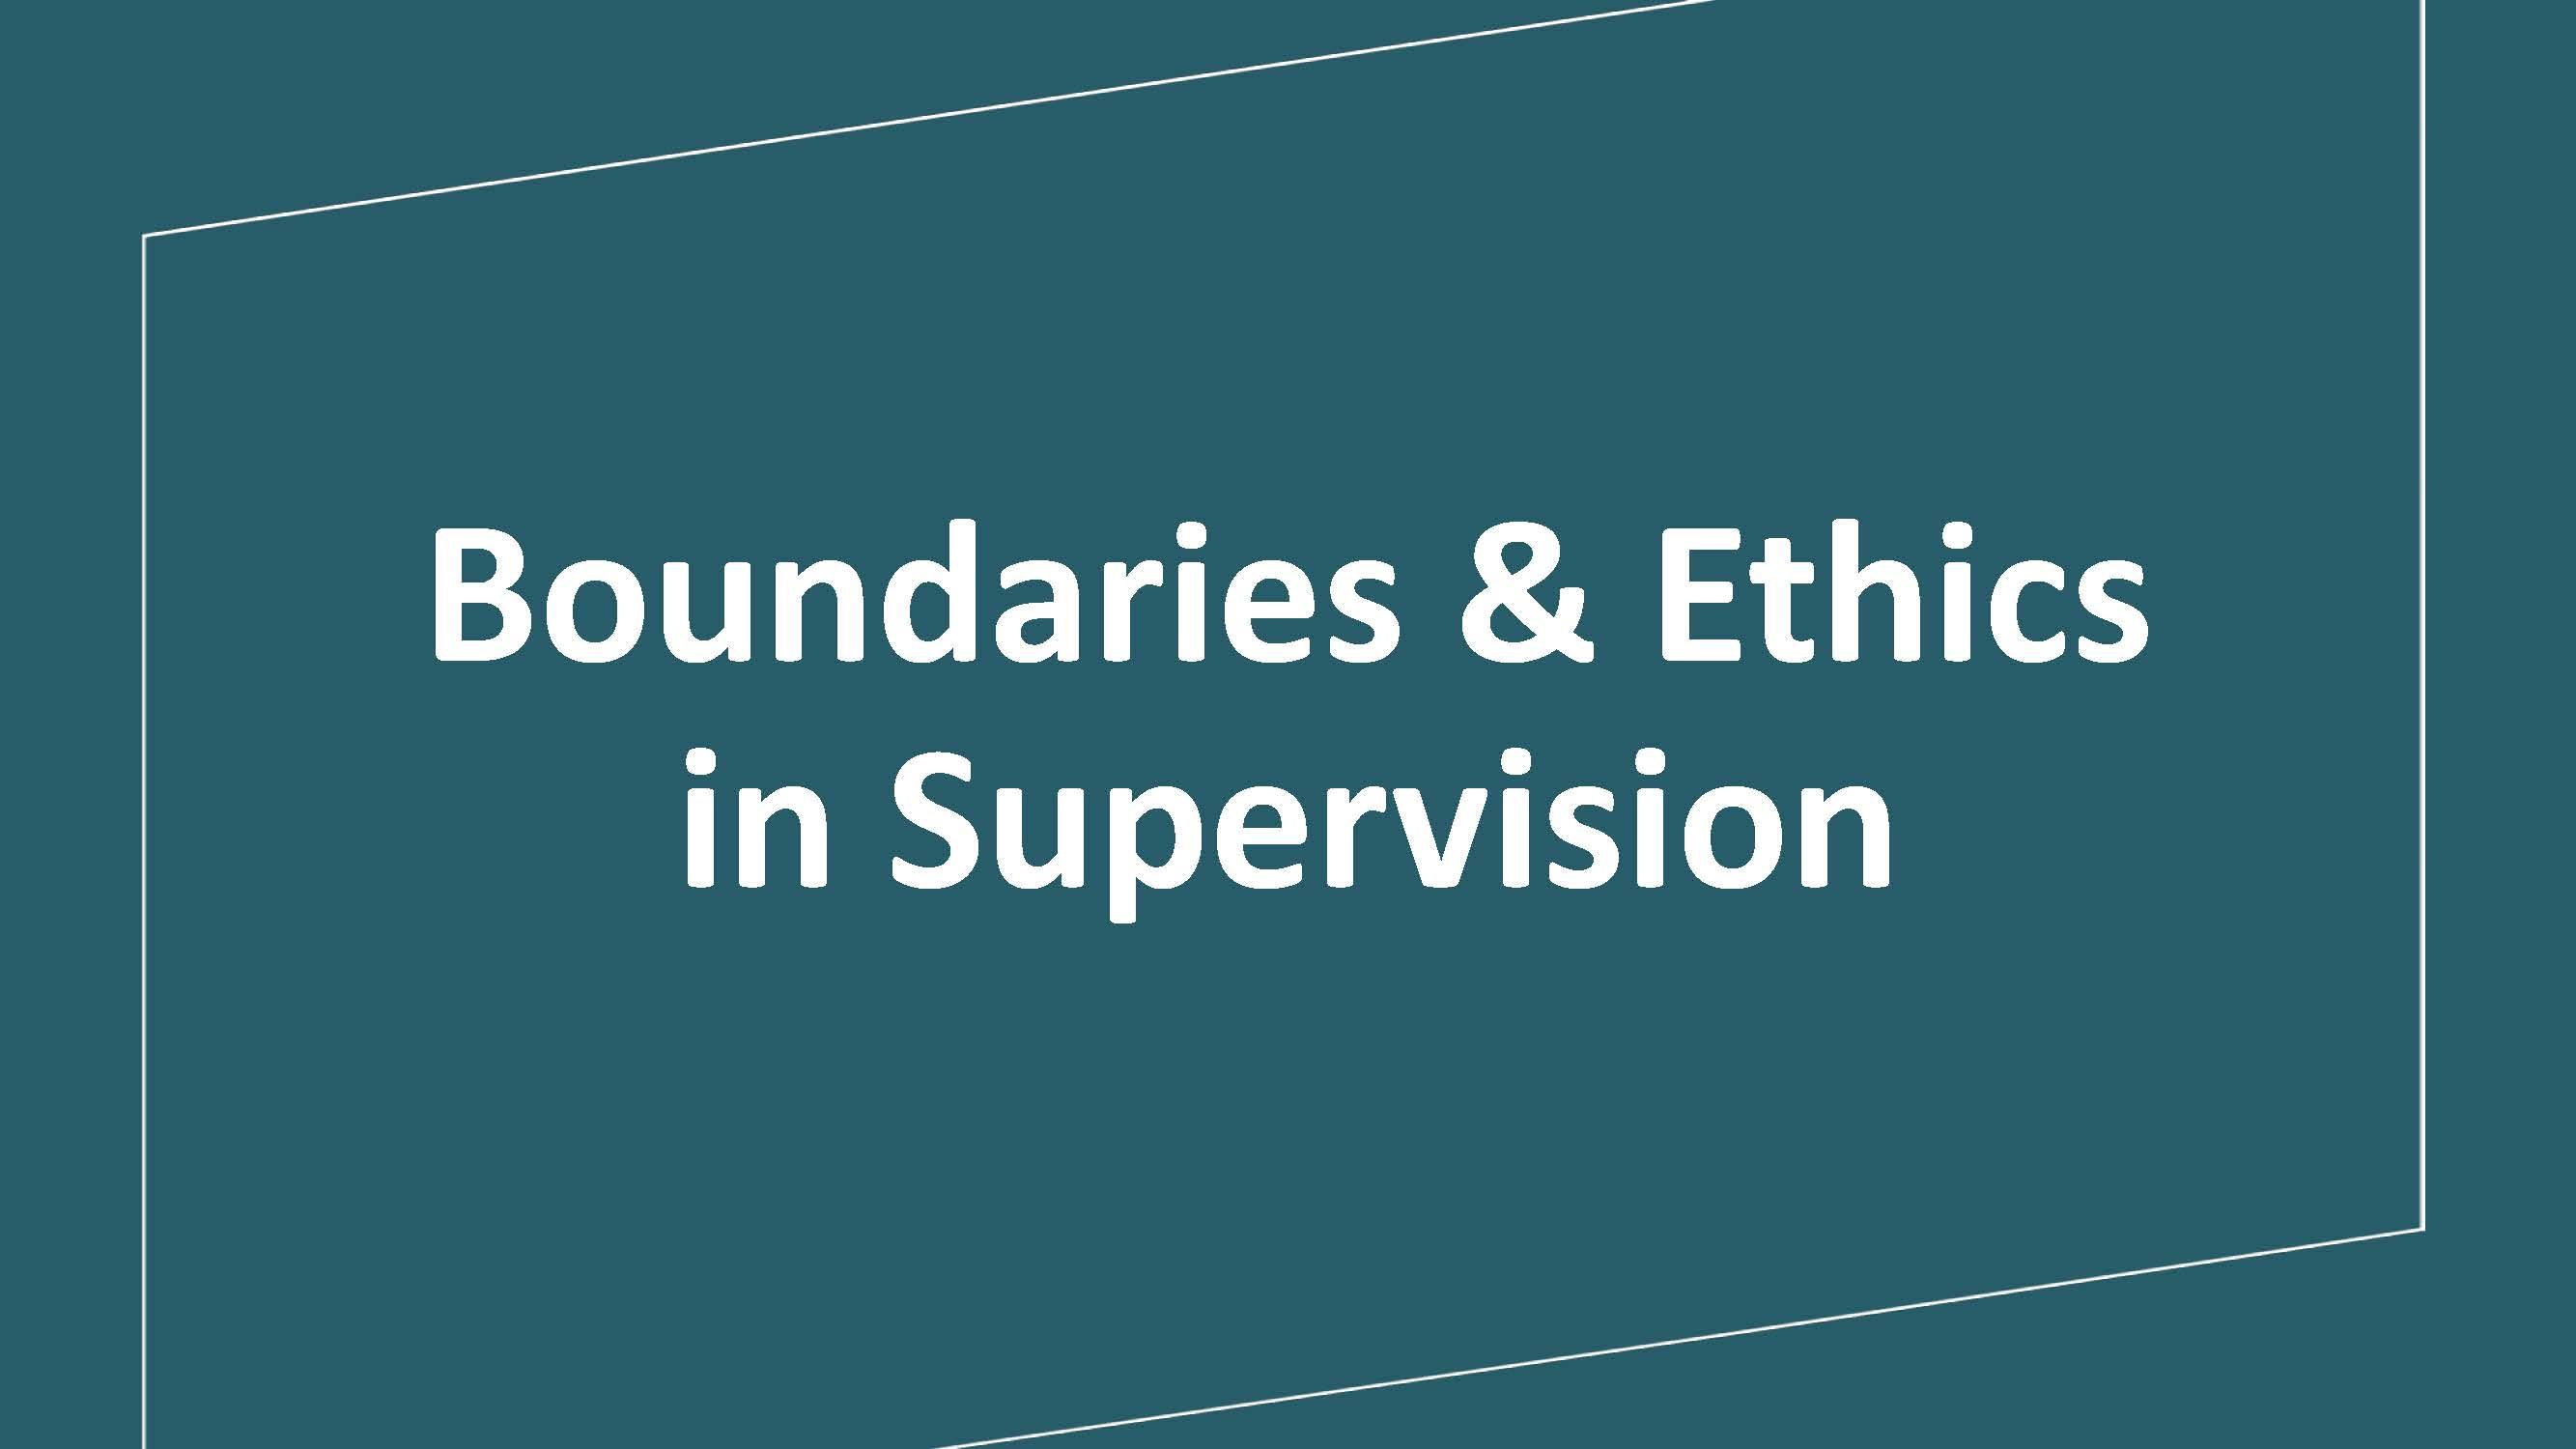 Boundaries & Ethics in Supervision